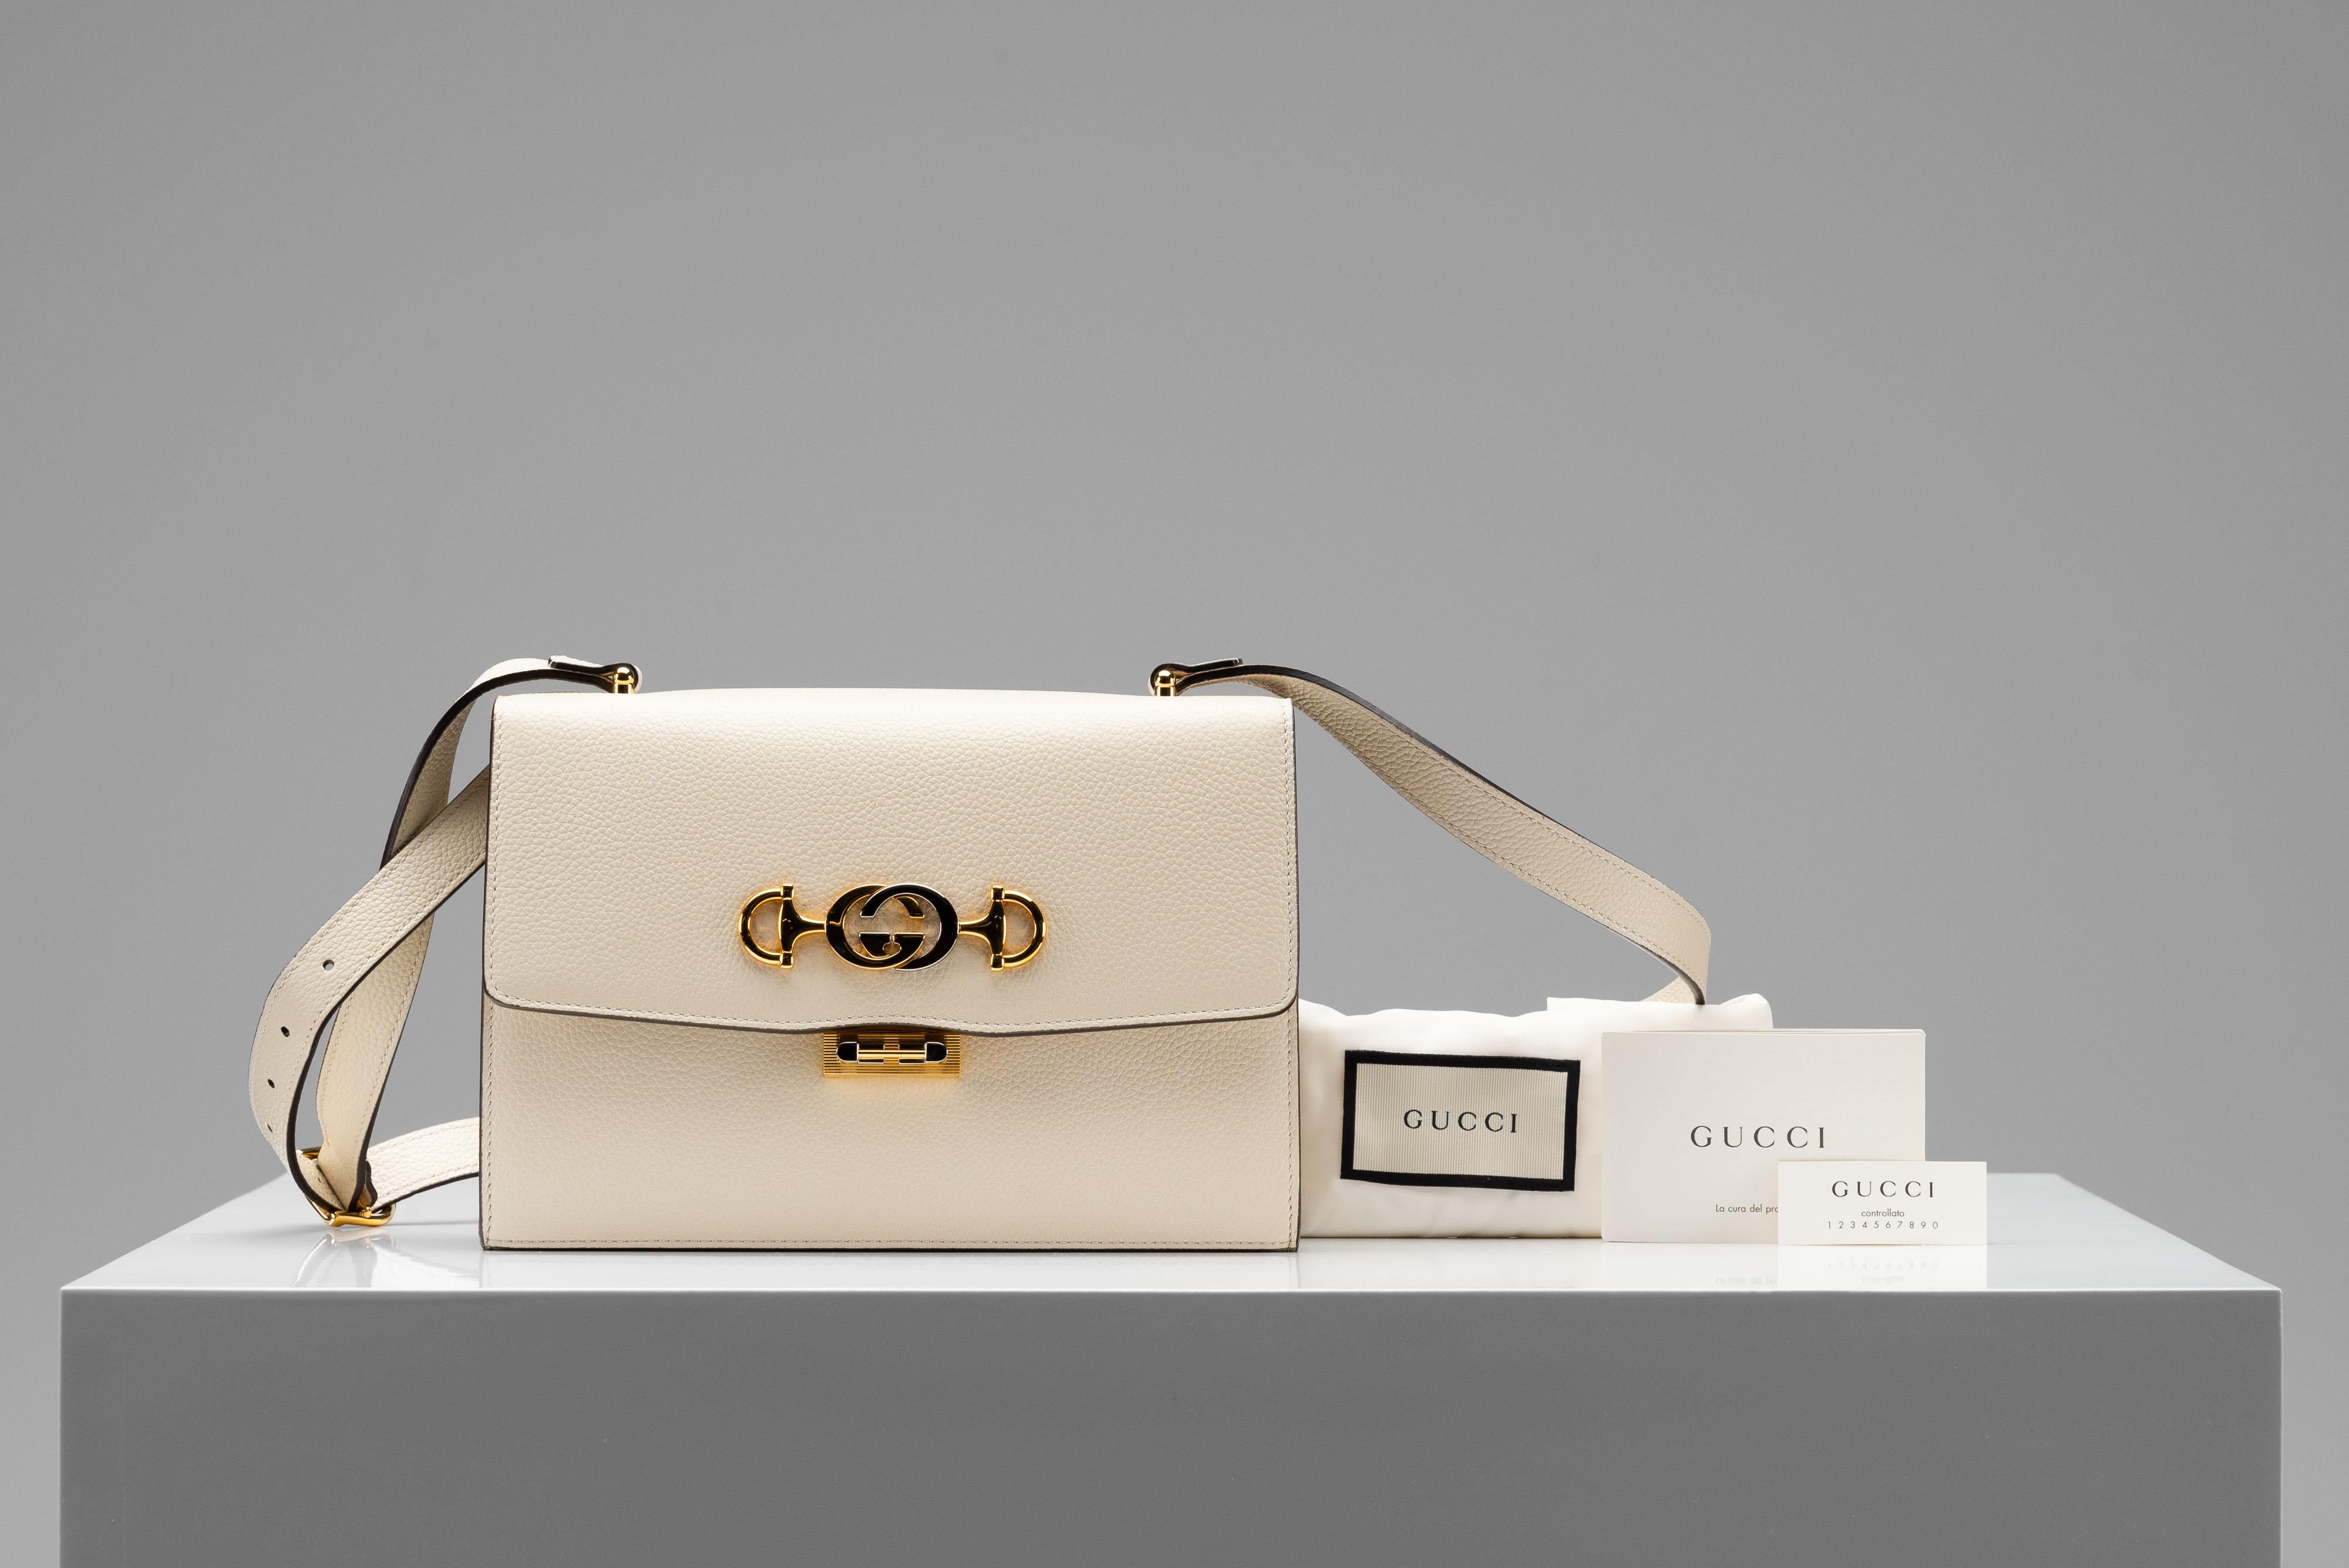 From the collection of SAVINETI we offer this Gucci White Zumi Shoulder Bag:
-    Brand: Gucci
-    Model: Zumi Shoulder Bag
-    Color: White
-    Condition: Excellent
-    Extras: Booklet & Dustbag

Authenticity is our core value at SAVINETI and